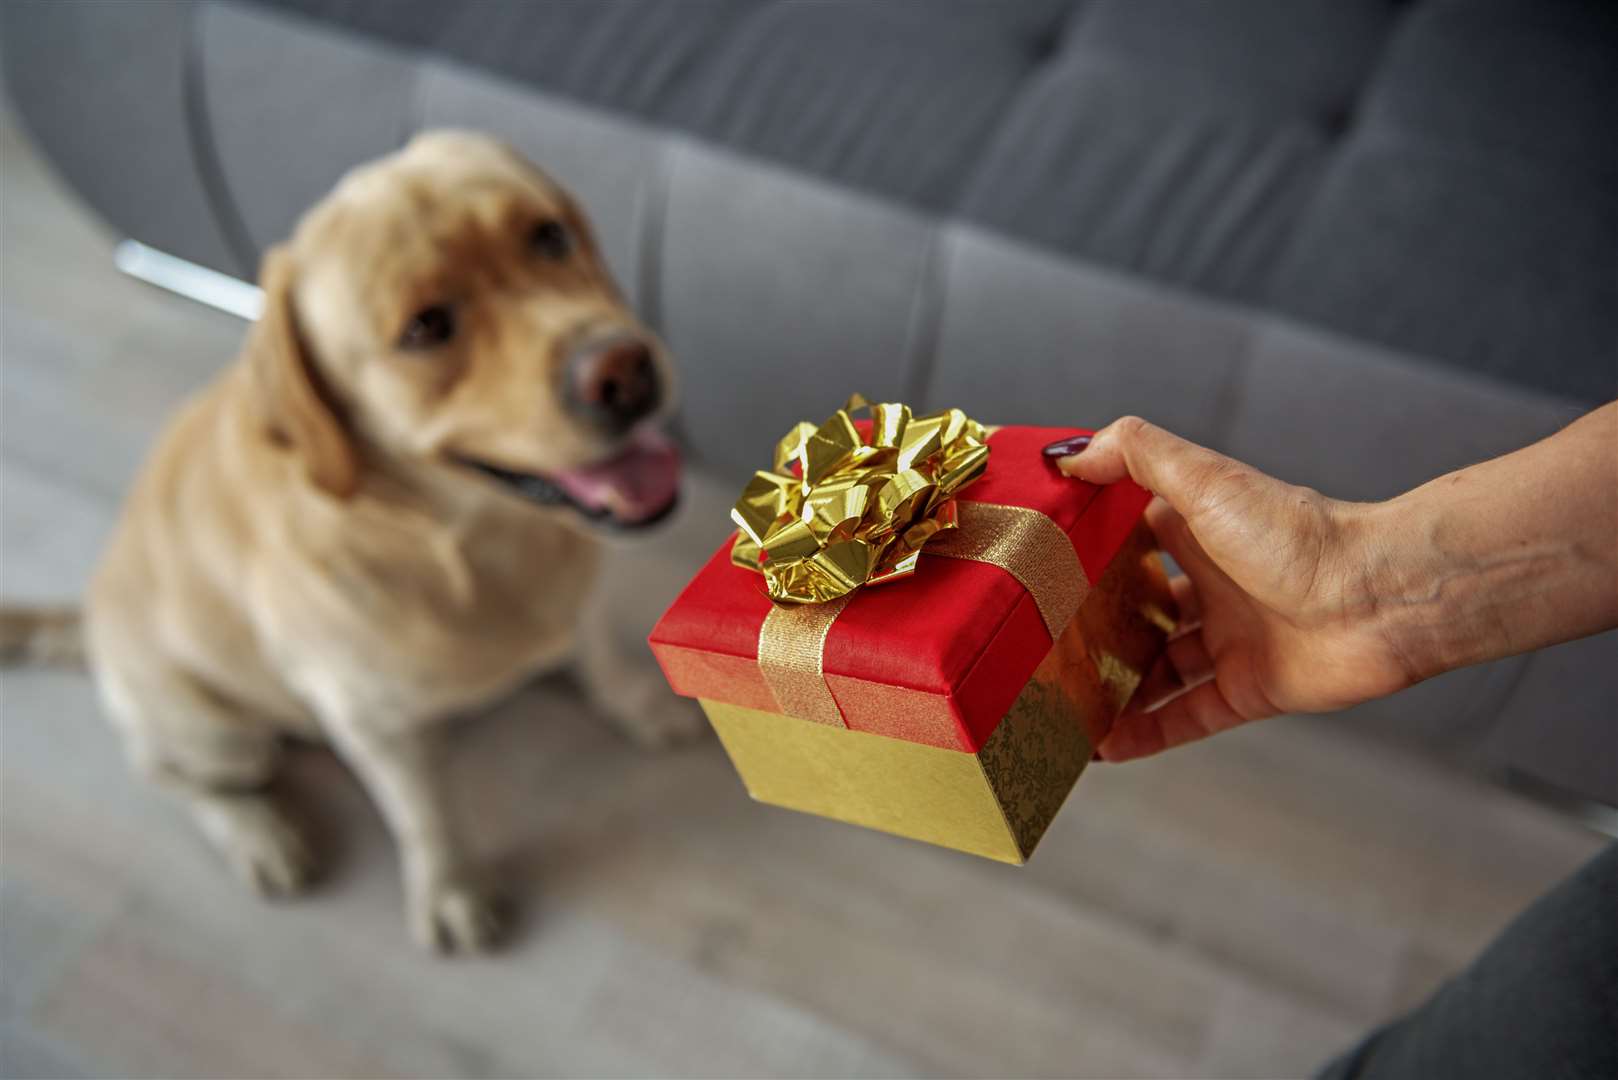 Be careful with what you give your pets to eat this festive season.